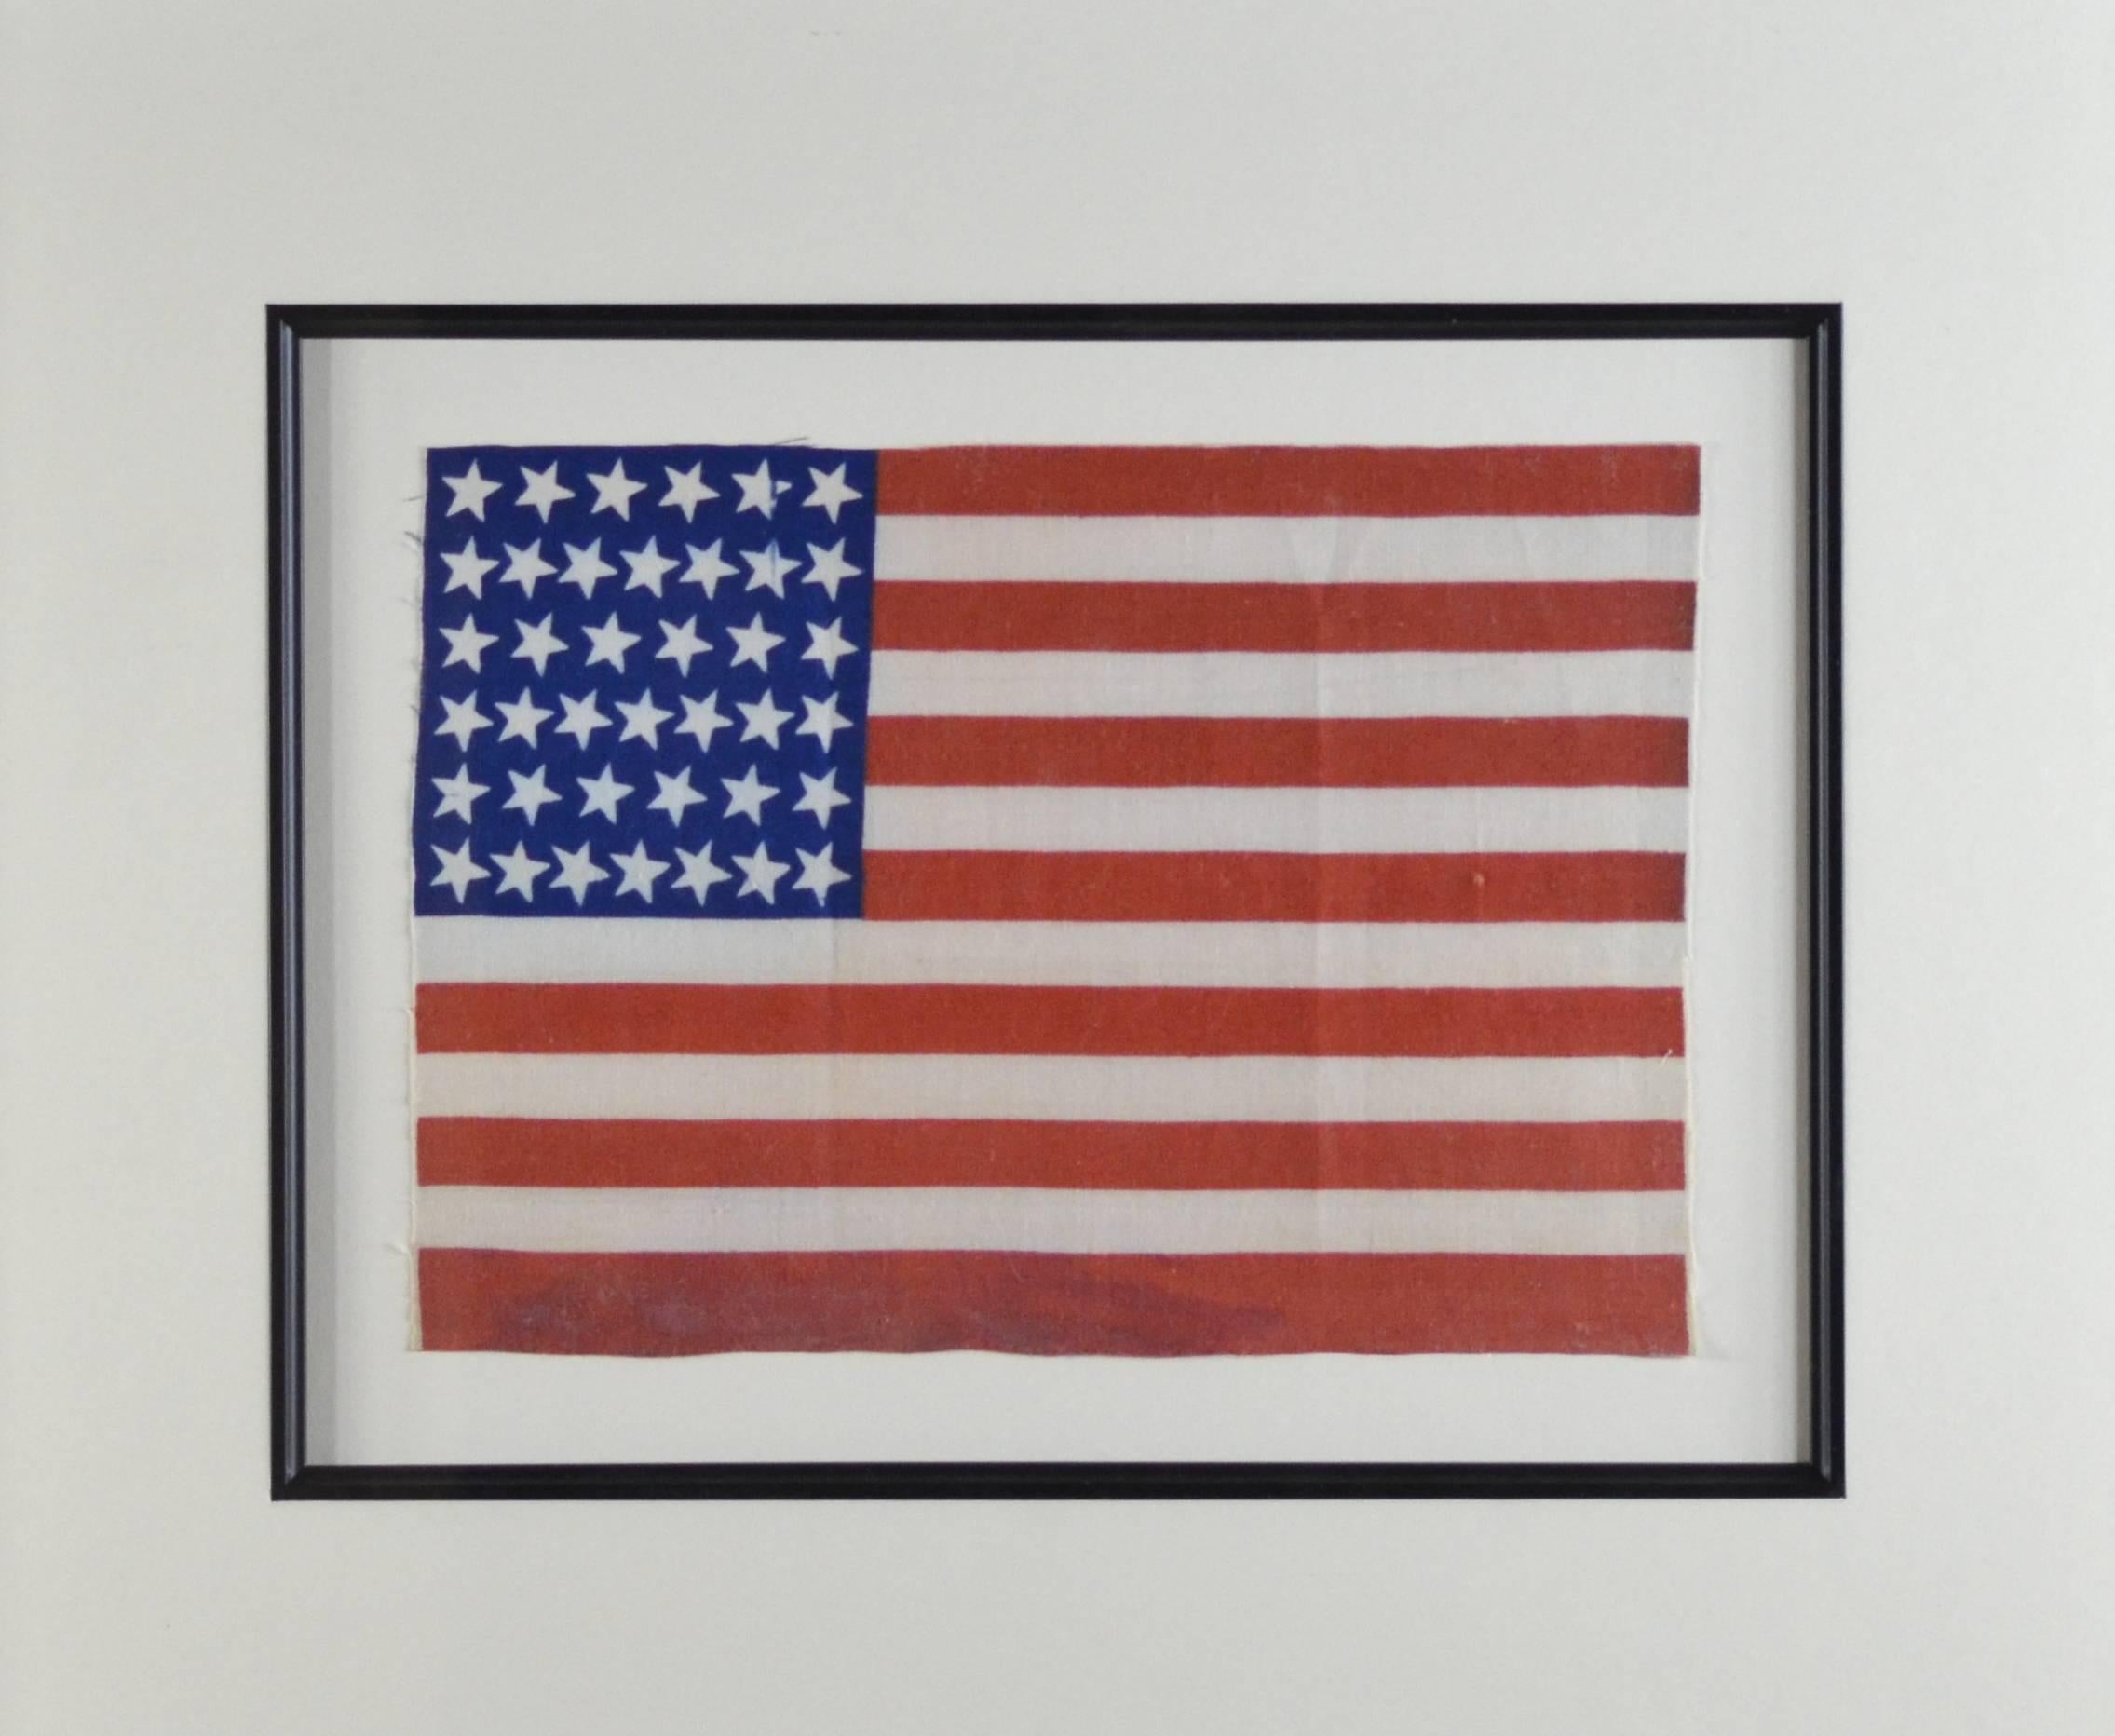 Authentic, antique 39 star American flag. Professionally framed with museum materials and UV acrylic. Has a cool star arrangement as the stars look like they are spinning. Unusual flag as the bottom red stripe is fatter than the others. Made of